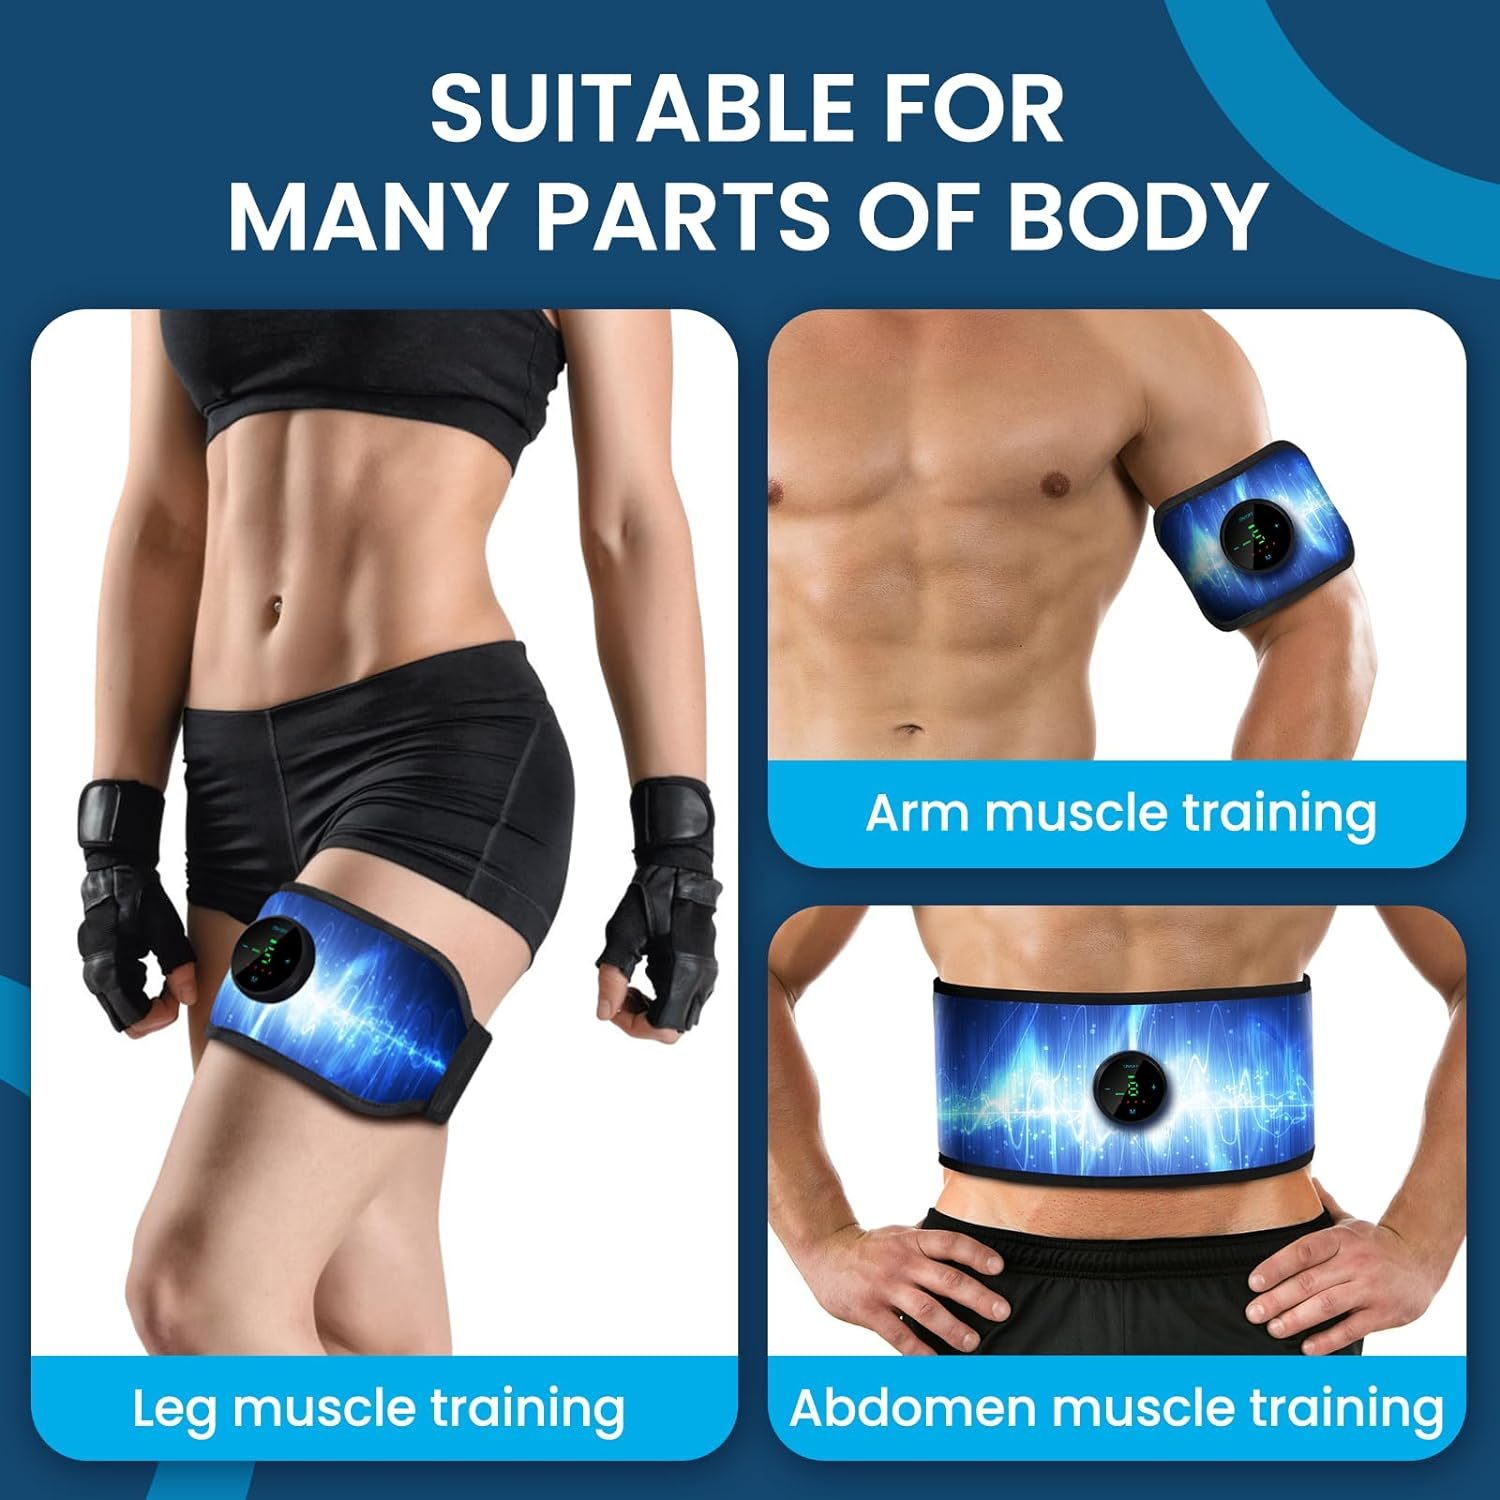 Smiofo ABS Stimulator, Muscle Machine Workout Equipment, Ab Toning Belt Muscle Toner Fitness Training for Abdomen/Arm/Leg, Ab Trainer for Home Body Shape